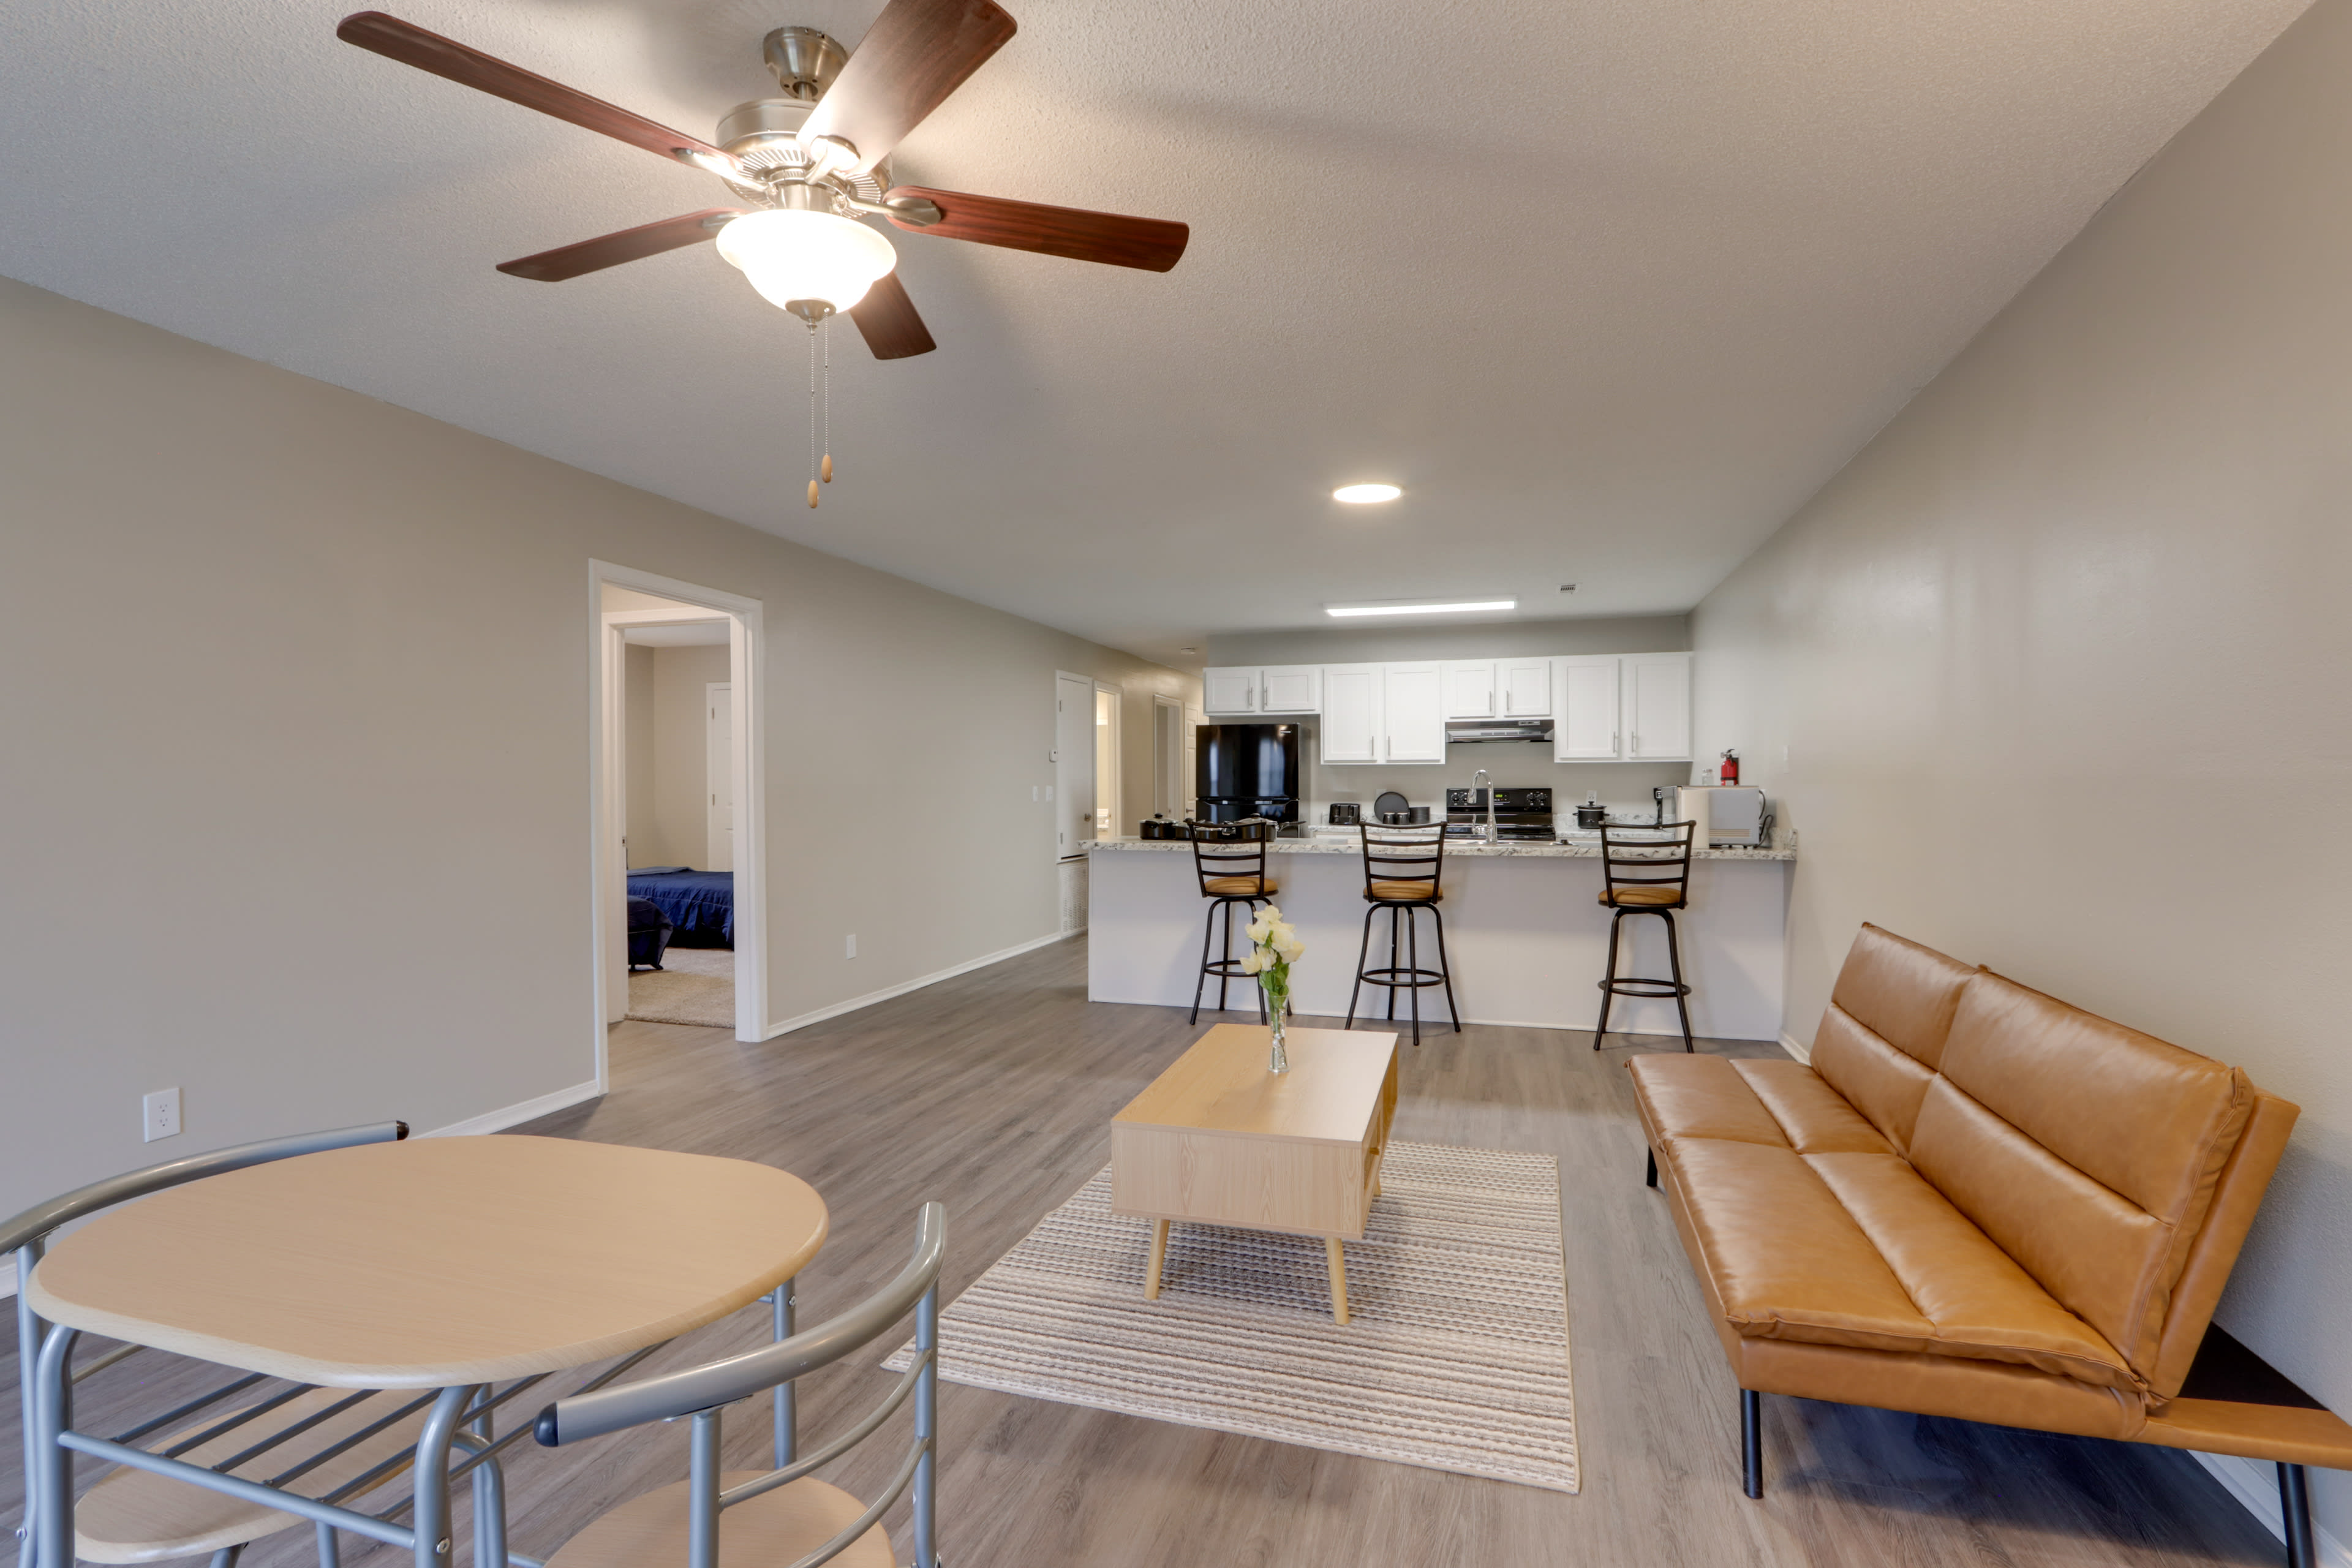 Fayetteville Vacation Rental | 3BR | 2BA | 1,300 Sq Ft | 1 Step to Enter